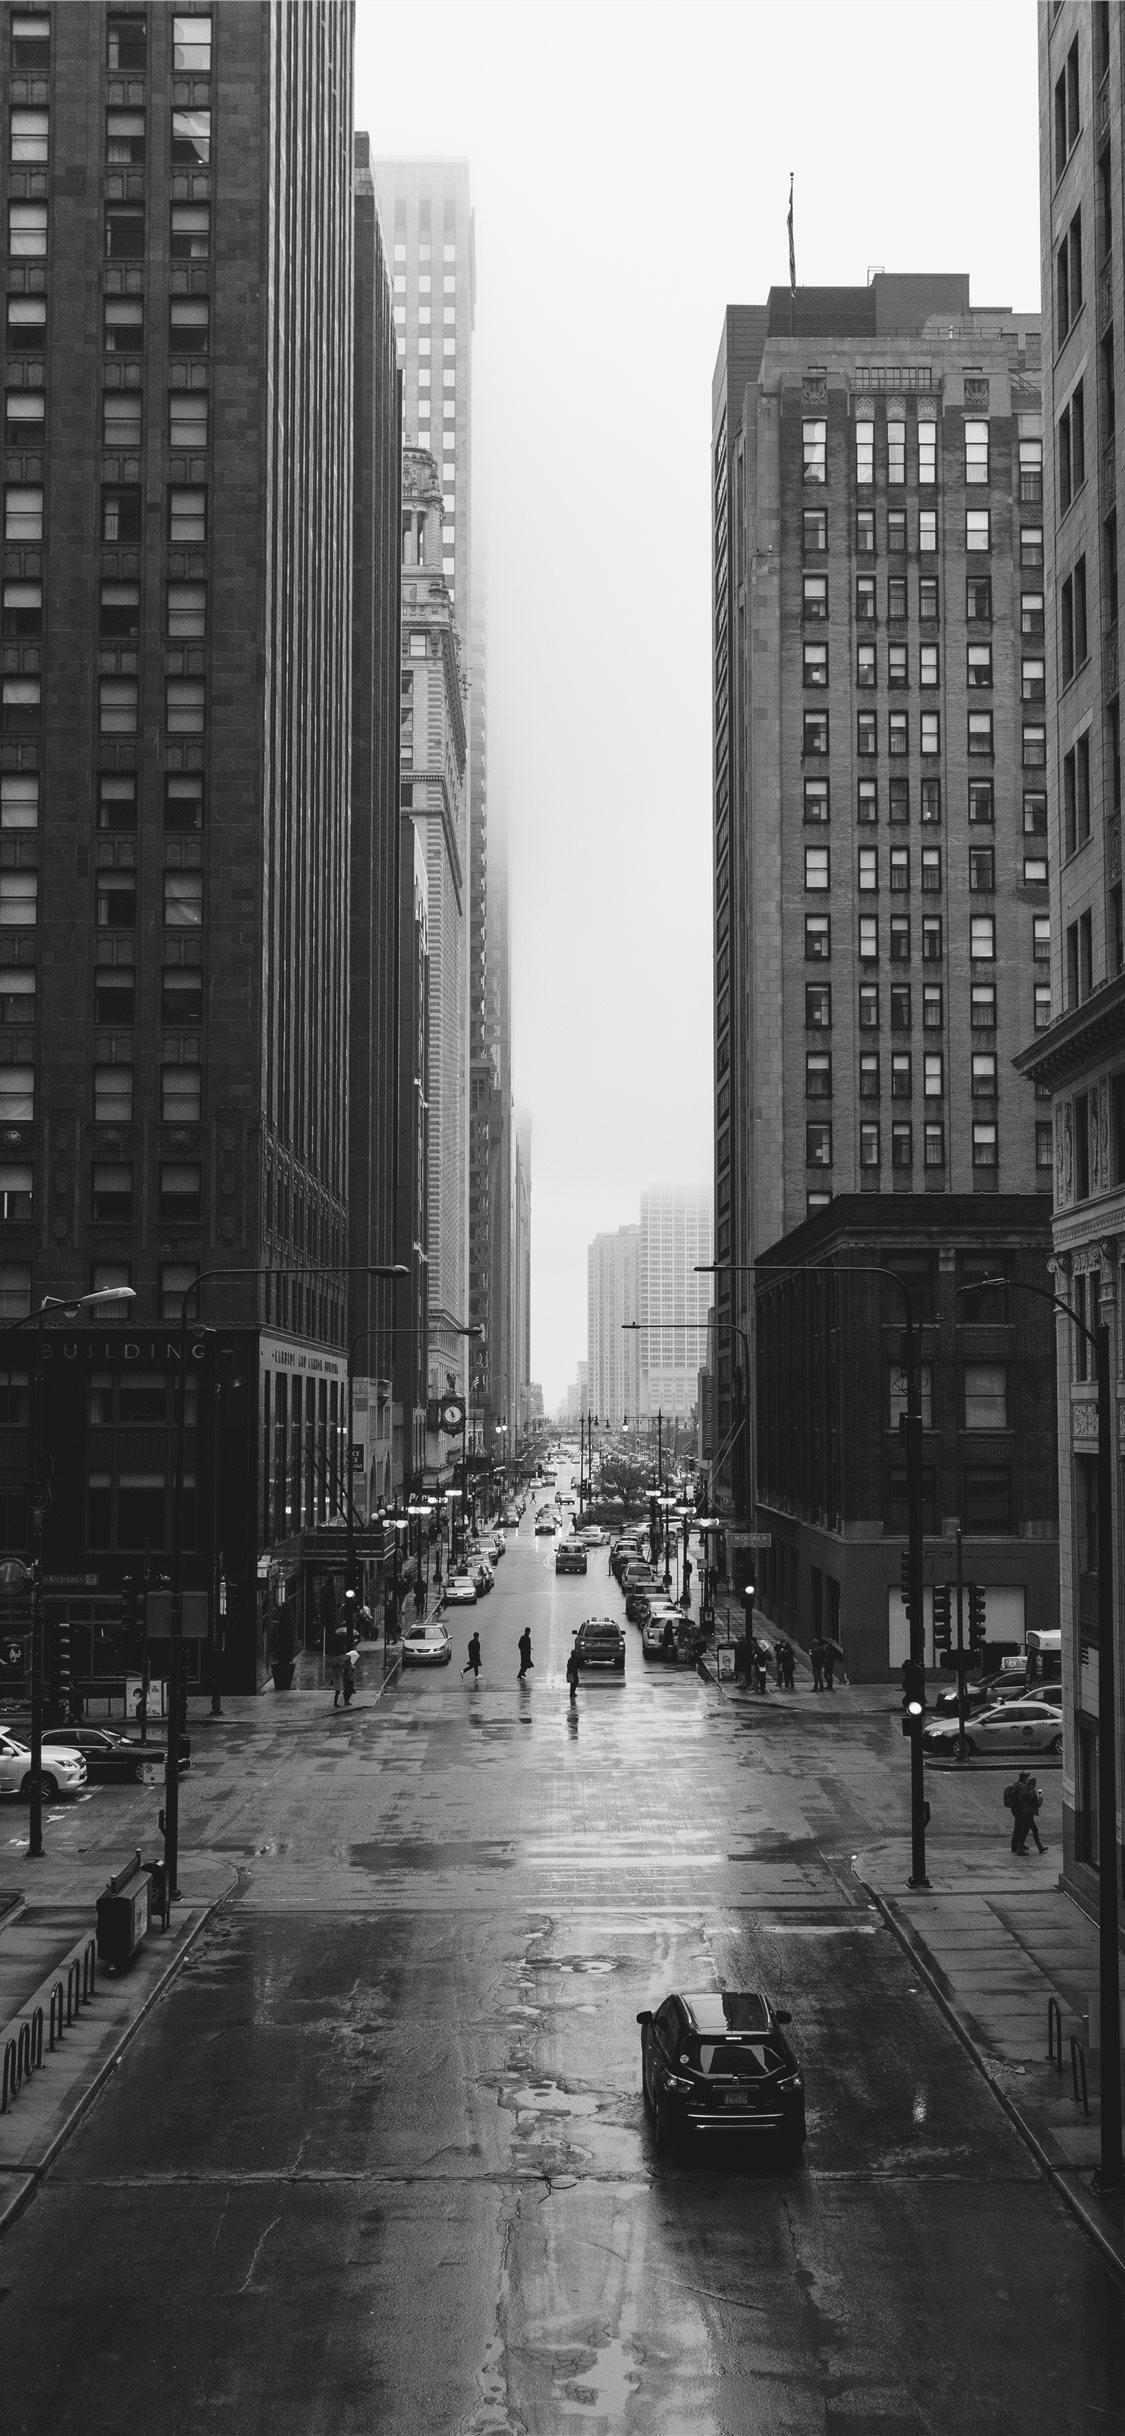 Black Streets iPhone X Wallpaper Free Download